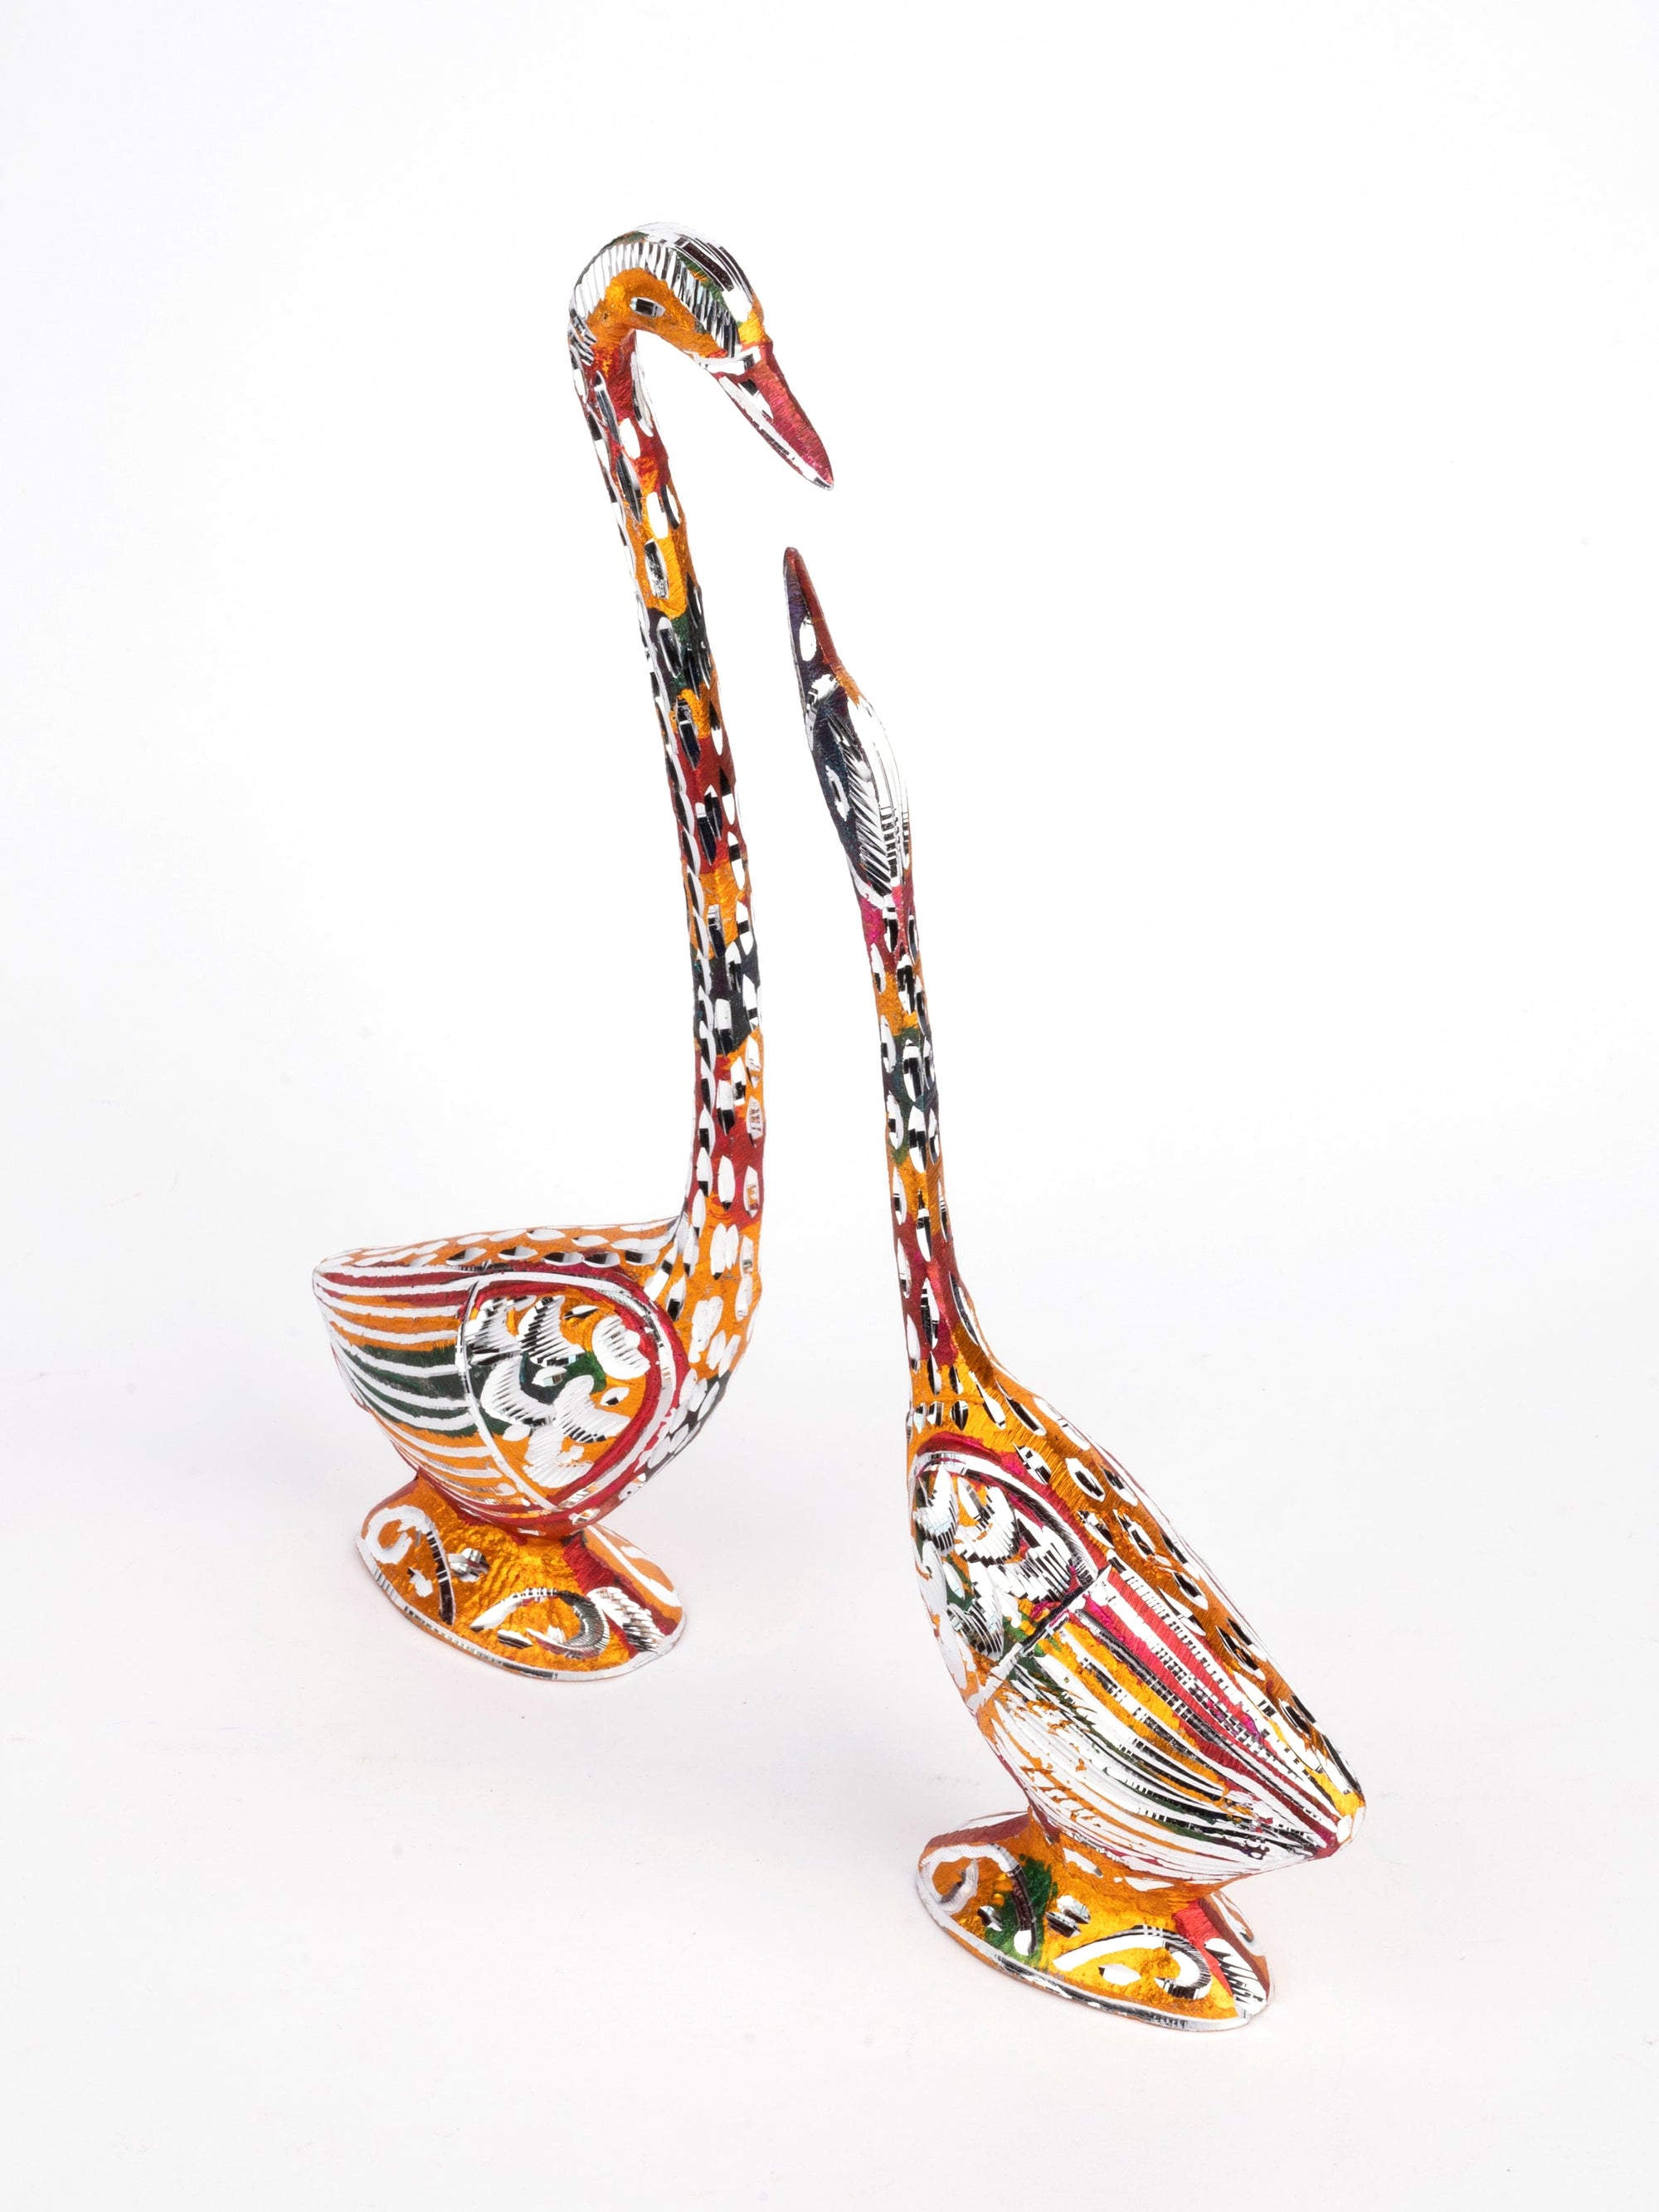 Zinc Metal Handcrafted Pair of Swan Colorful Showpiece - 8 inches height - The Heritage Artifacts